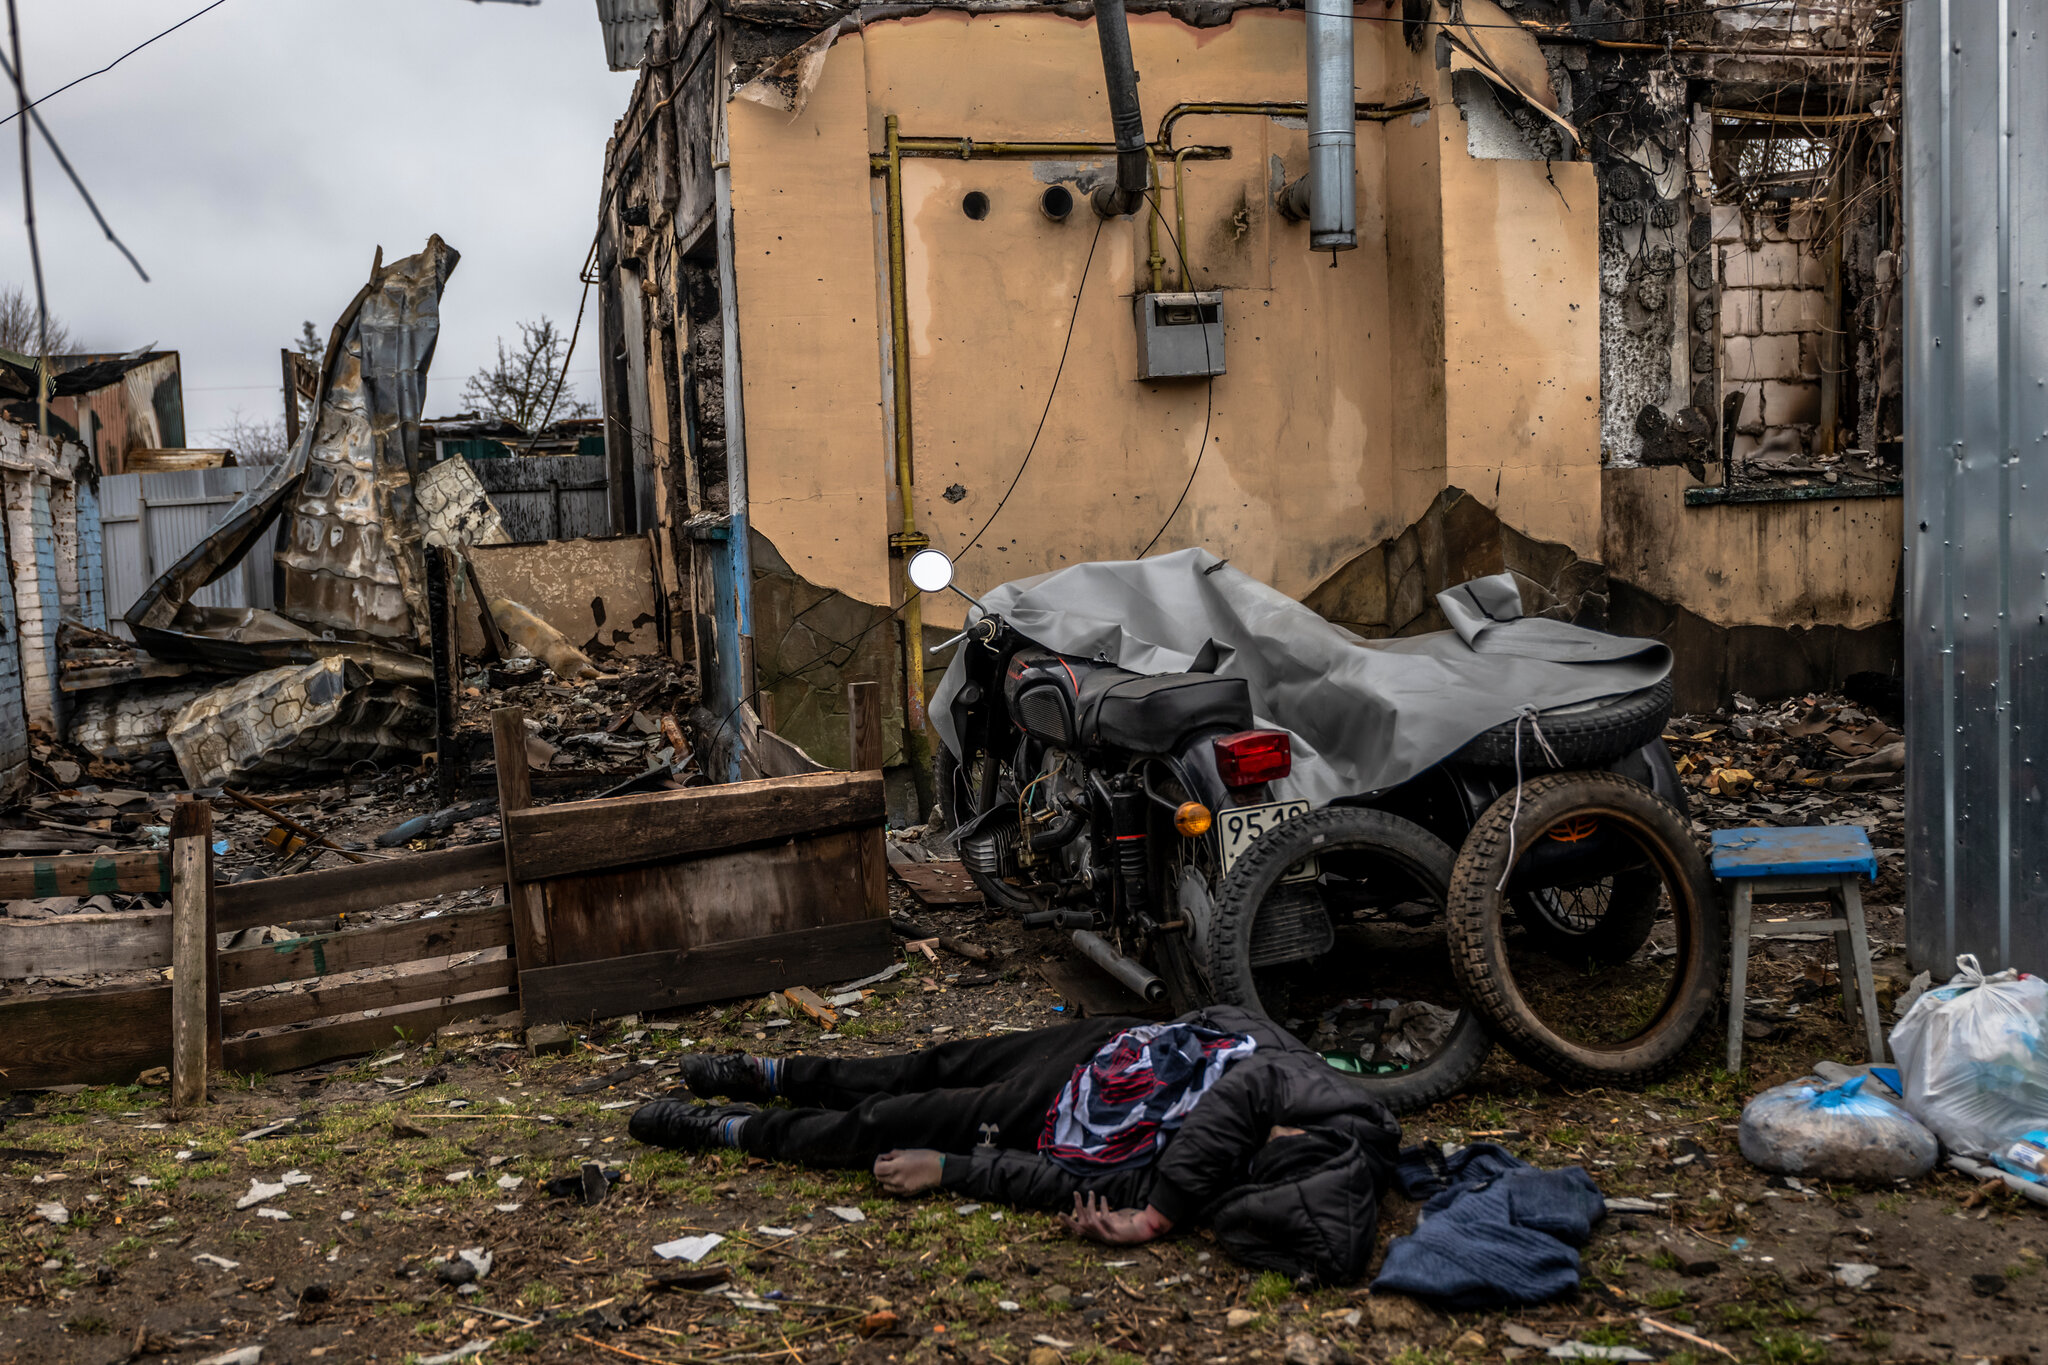 The body of a civilian in the yard of a destroyed home on Yablunska Street.